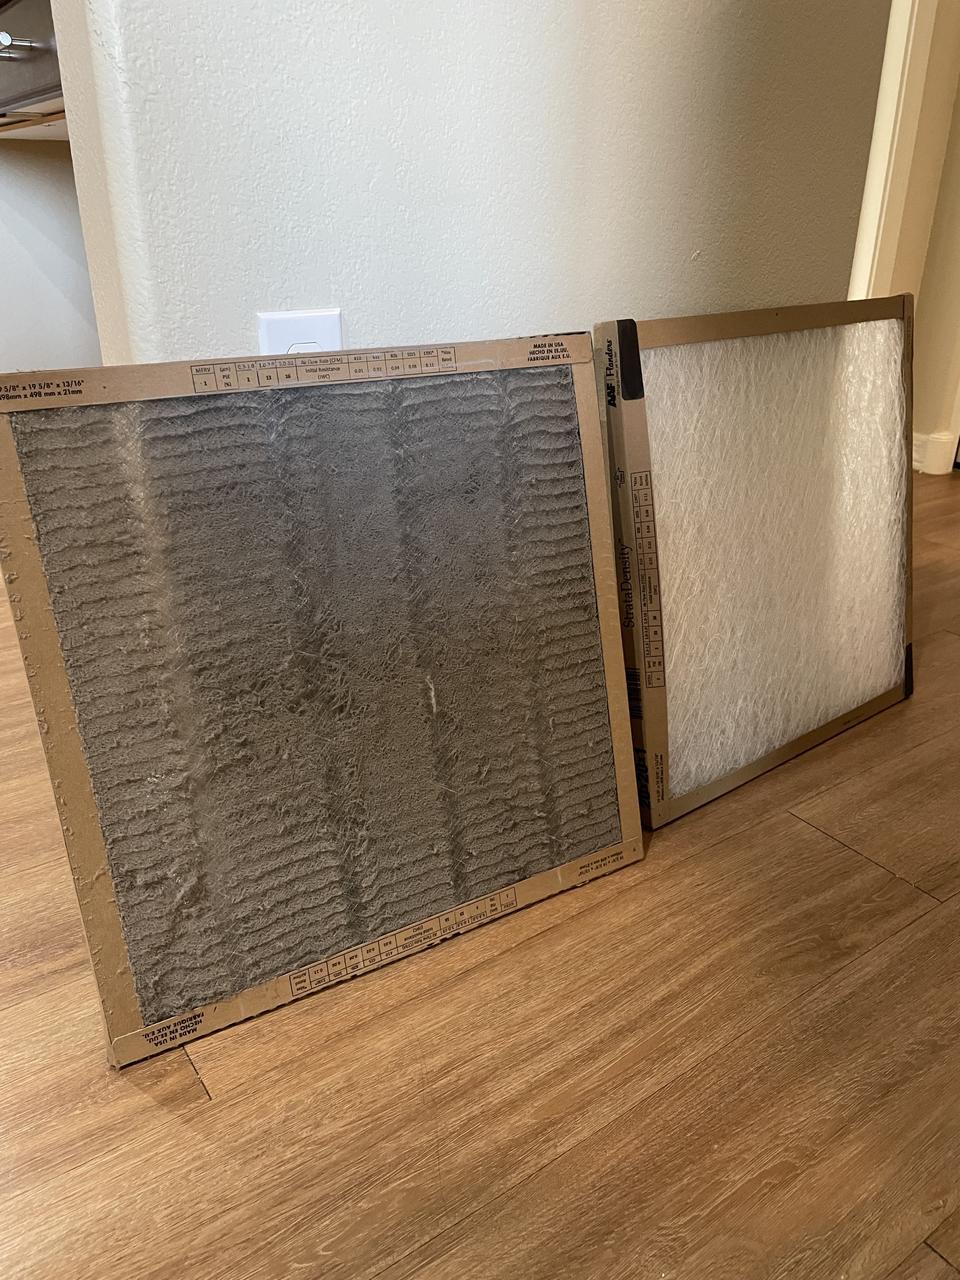 One square dirty air filter sitting next to a clean square air filter on a wood plank floor.